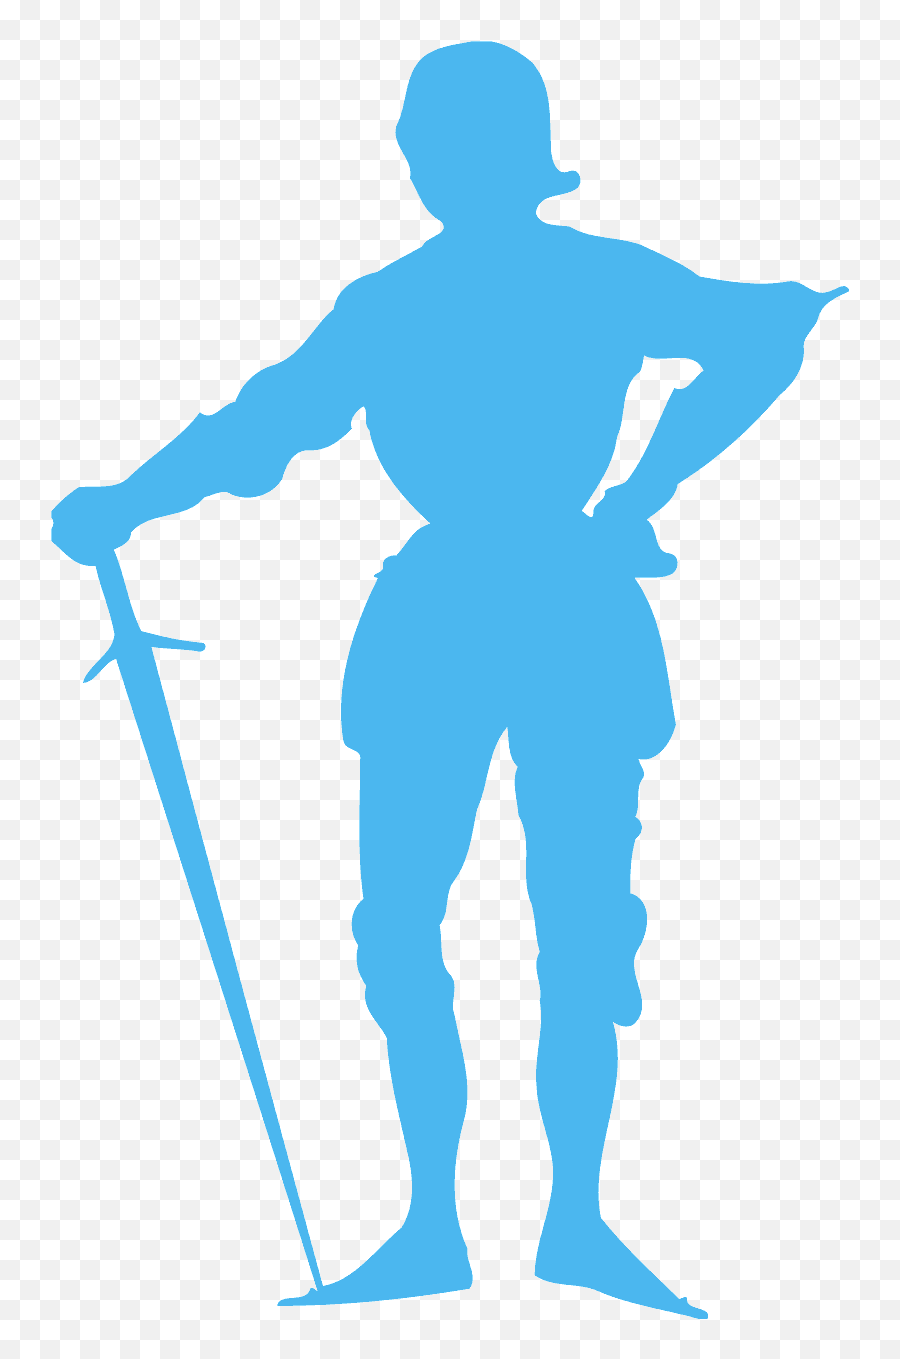 Free Vector Silhouettes - Knight Silhouette Png,Sword Silhouette Png